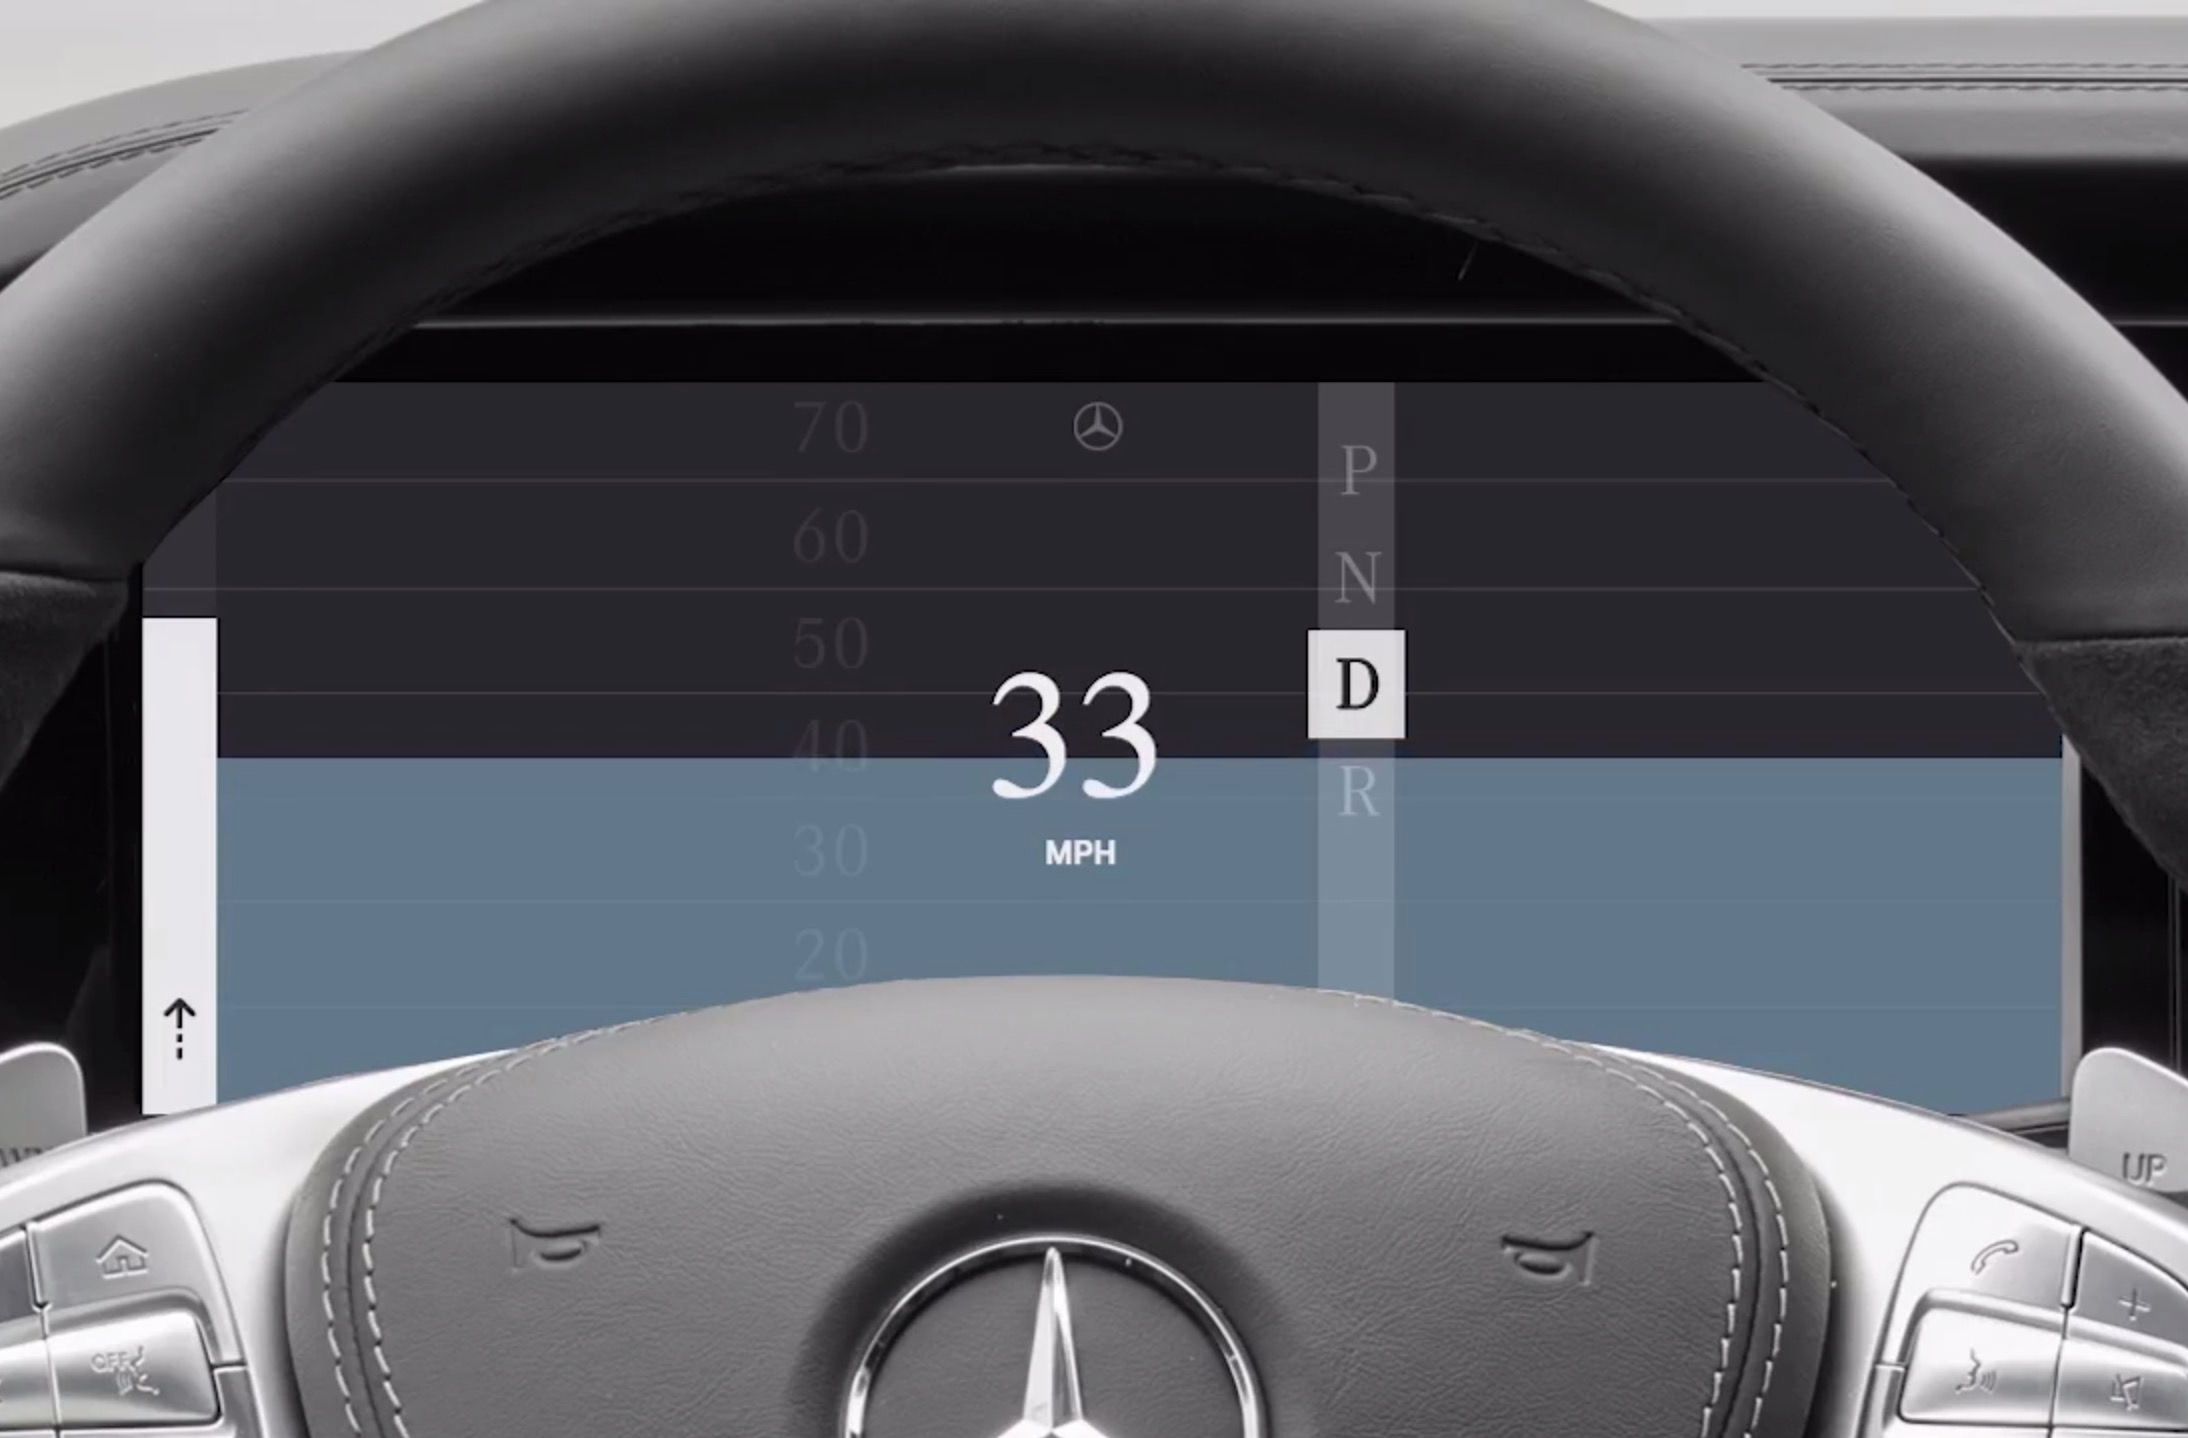 monument valley developer wants a stab at designing your car dashboard image 1